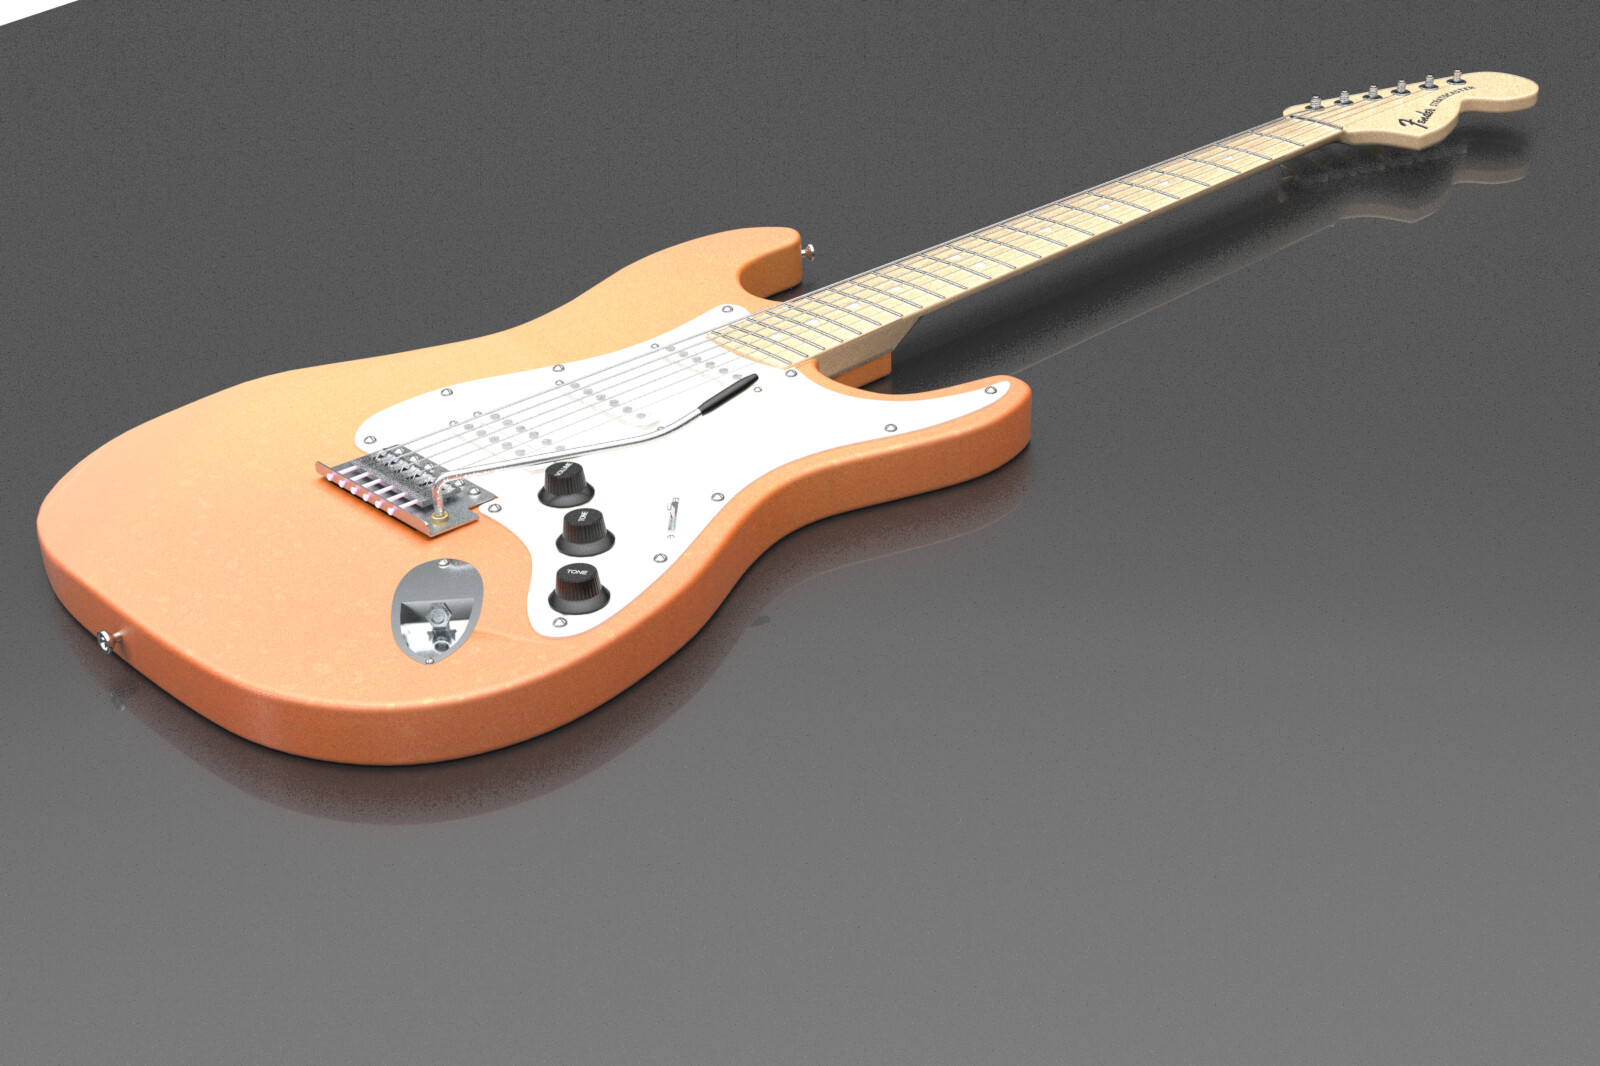 Fender Strat modeled in Modo - this is an in-modo render. I converted this model to a native ArchiCAD object, with appropriate vectorial cleanups and the ability for the materials to be easily tweaked in use.